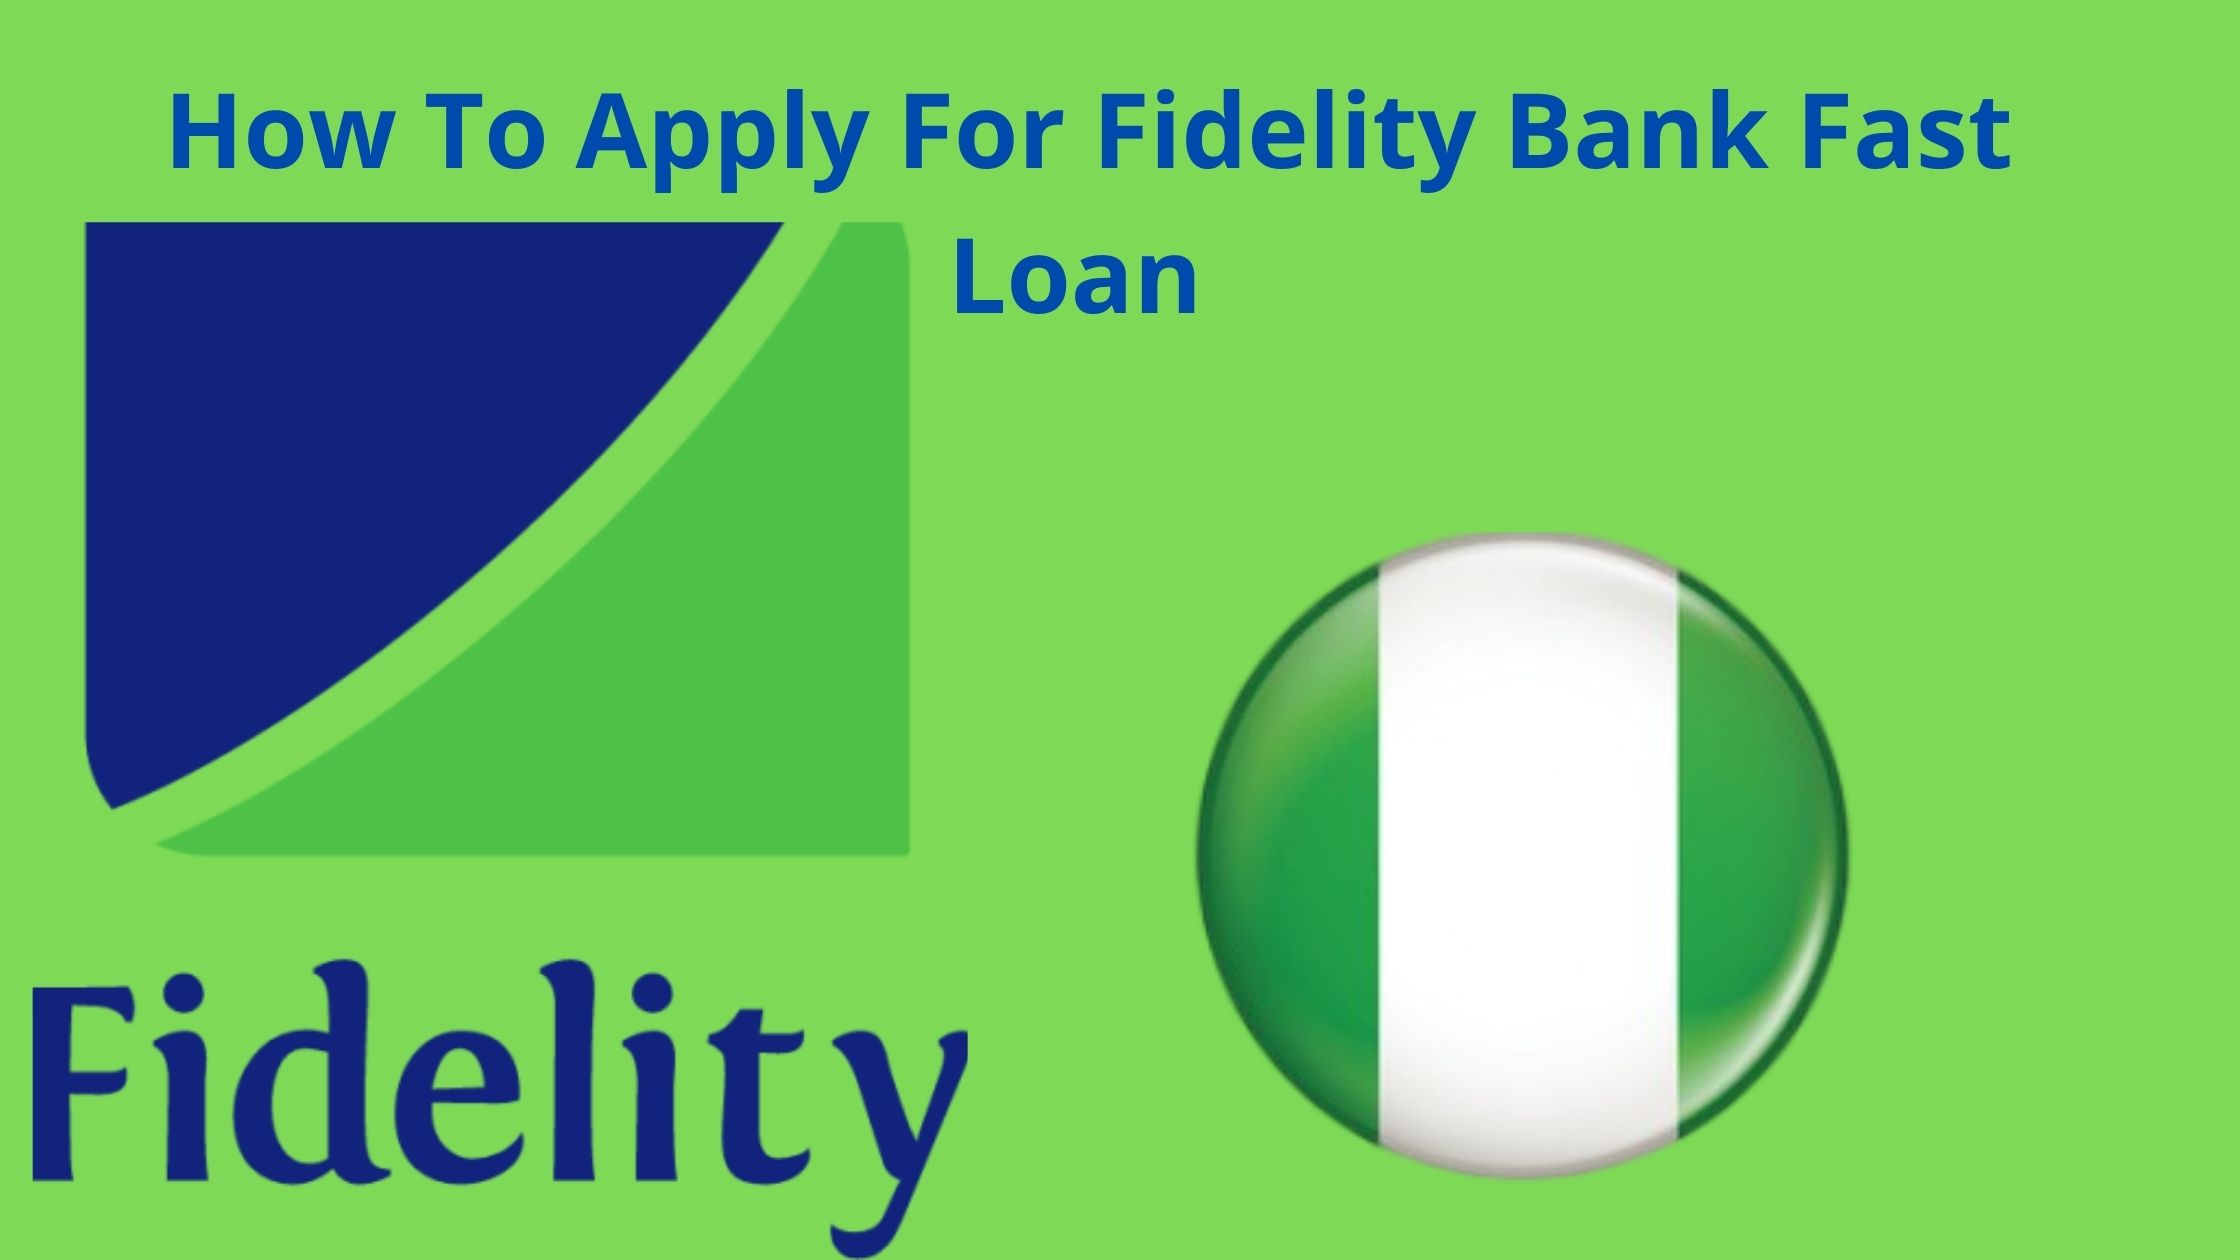 How To Apply For Fidelity Bank Fast Loan, 2022, Get Loan Now